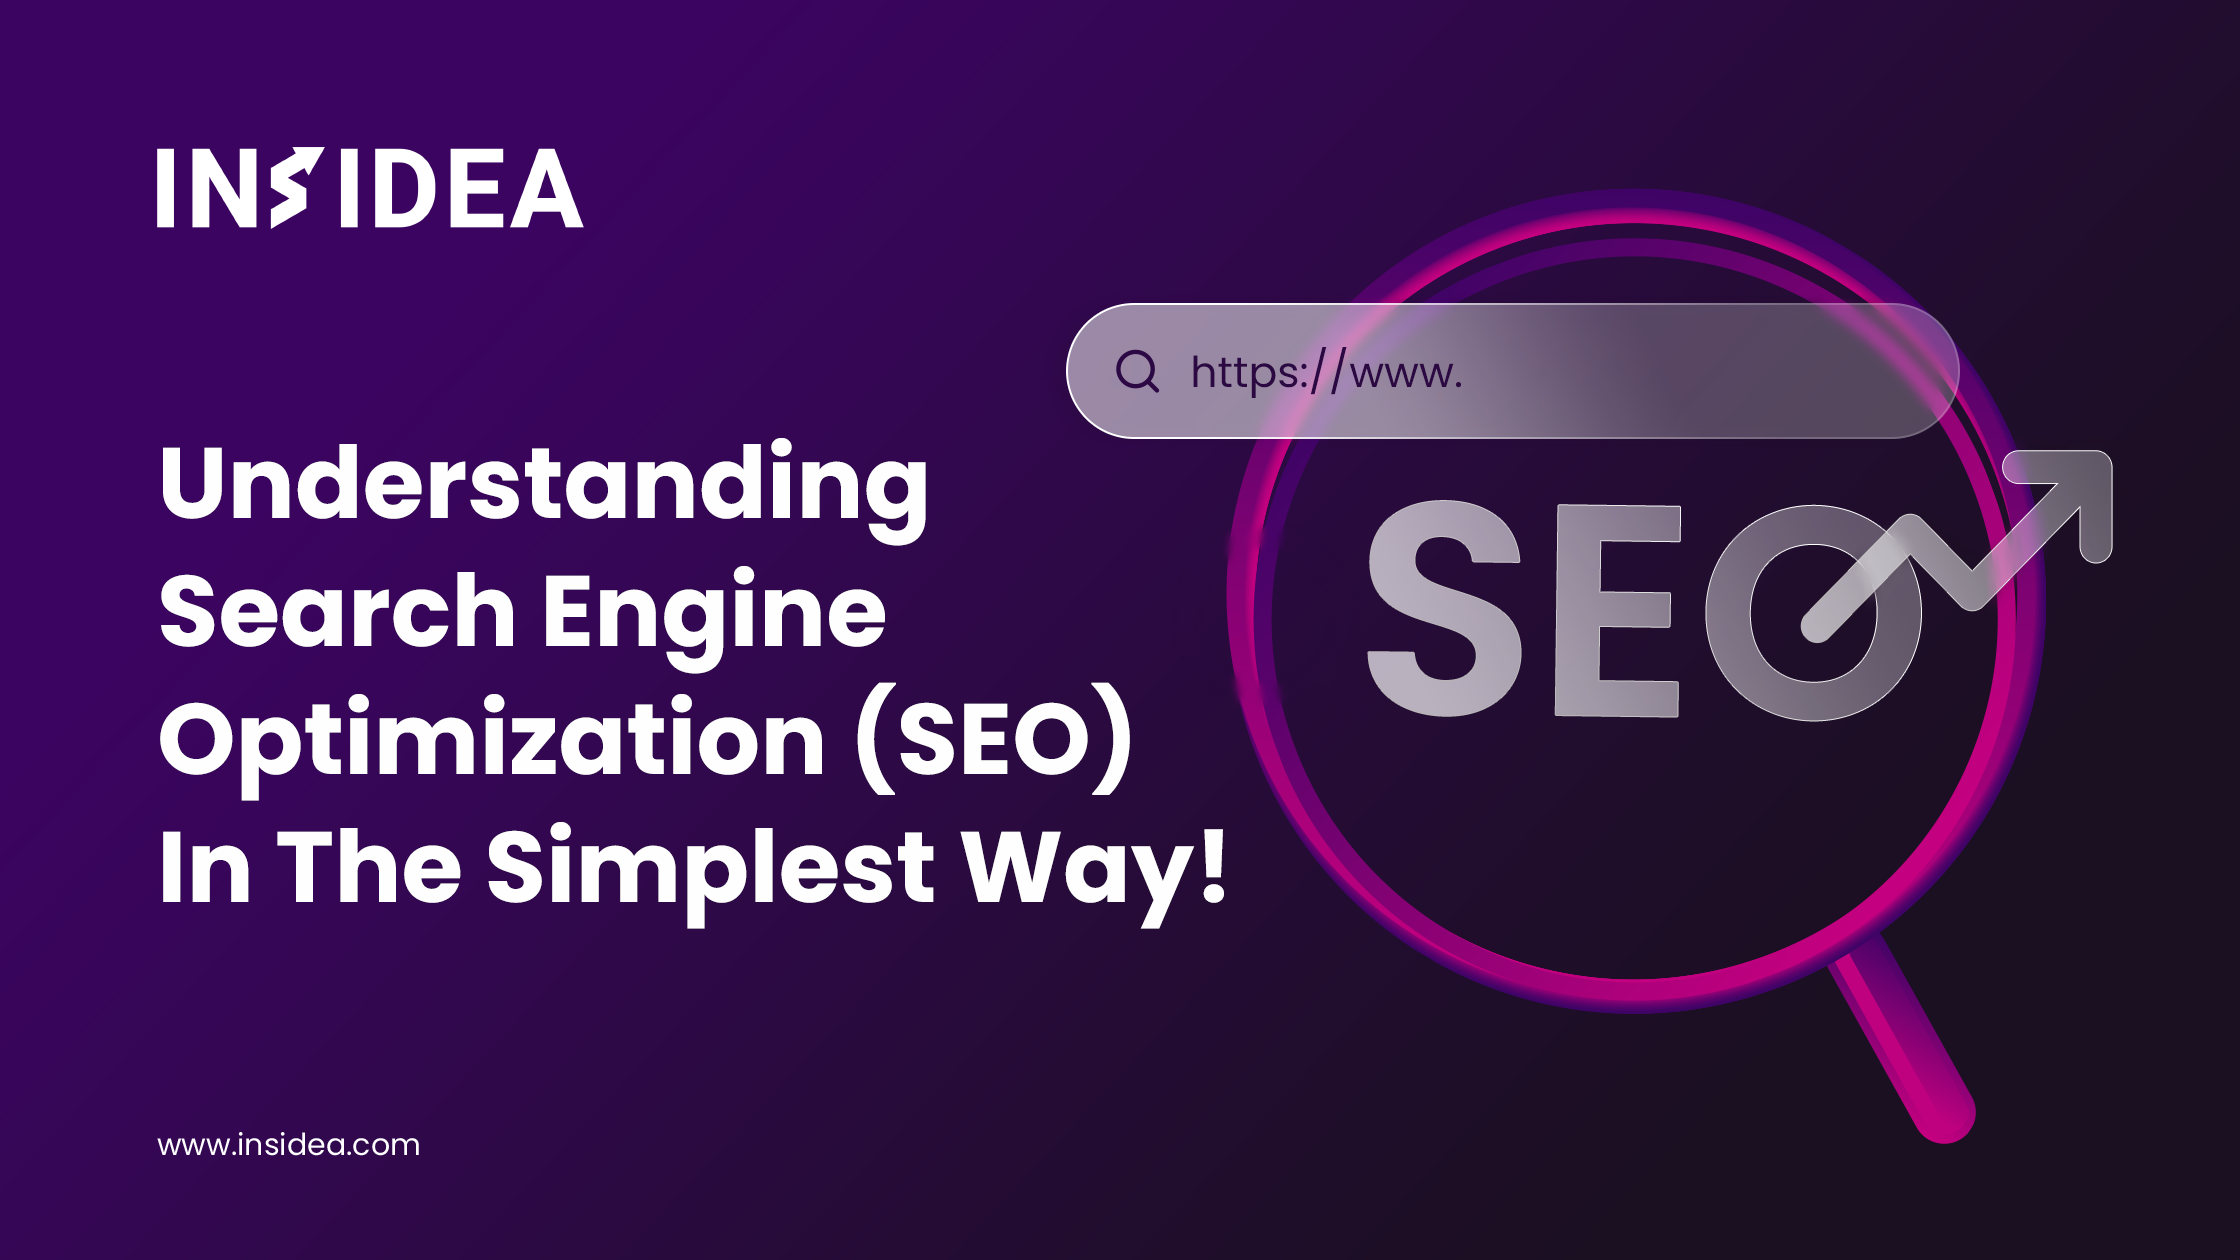 Understand Search Engine Optimization (SEO) In The Most Simplest Way